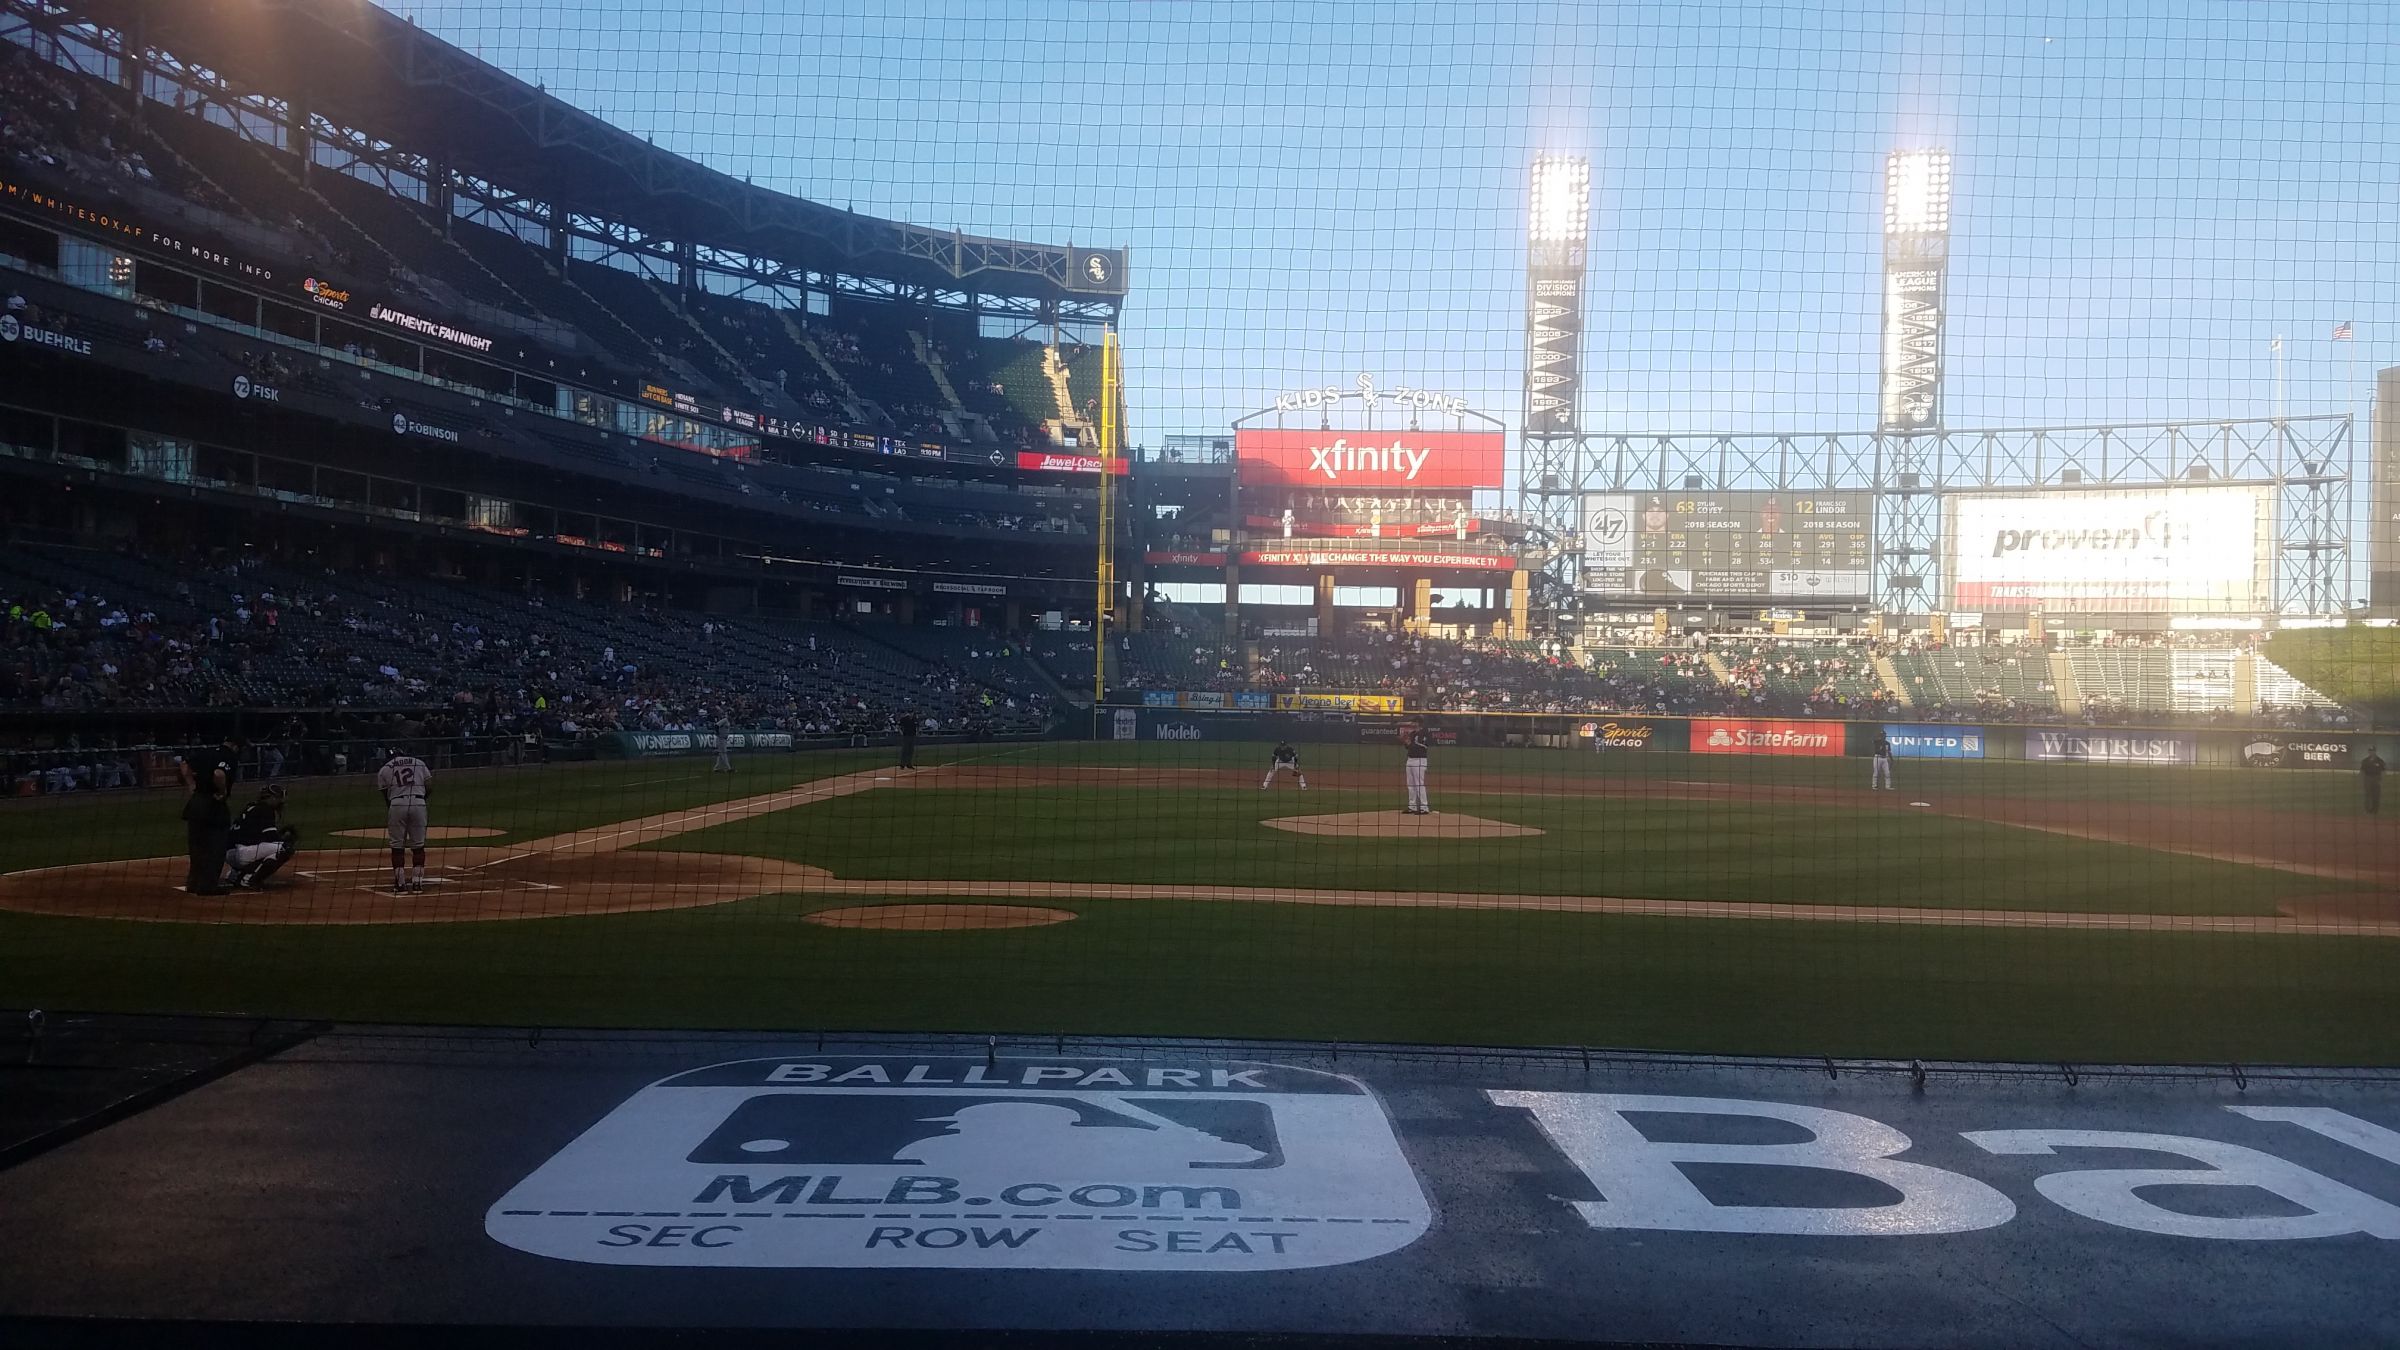 section 127, row 7 seat view  - guaranteed rate field